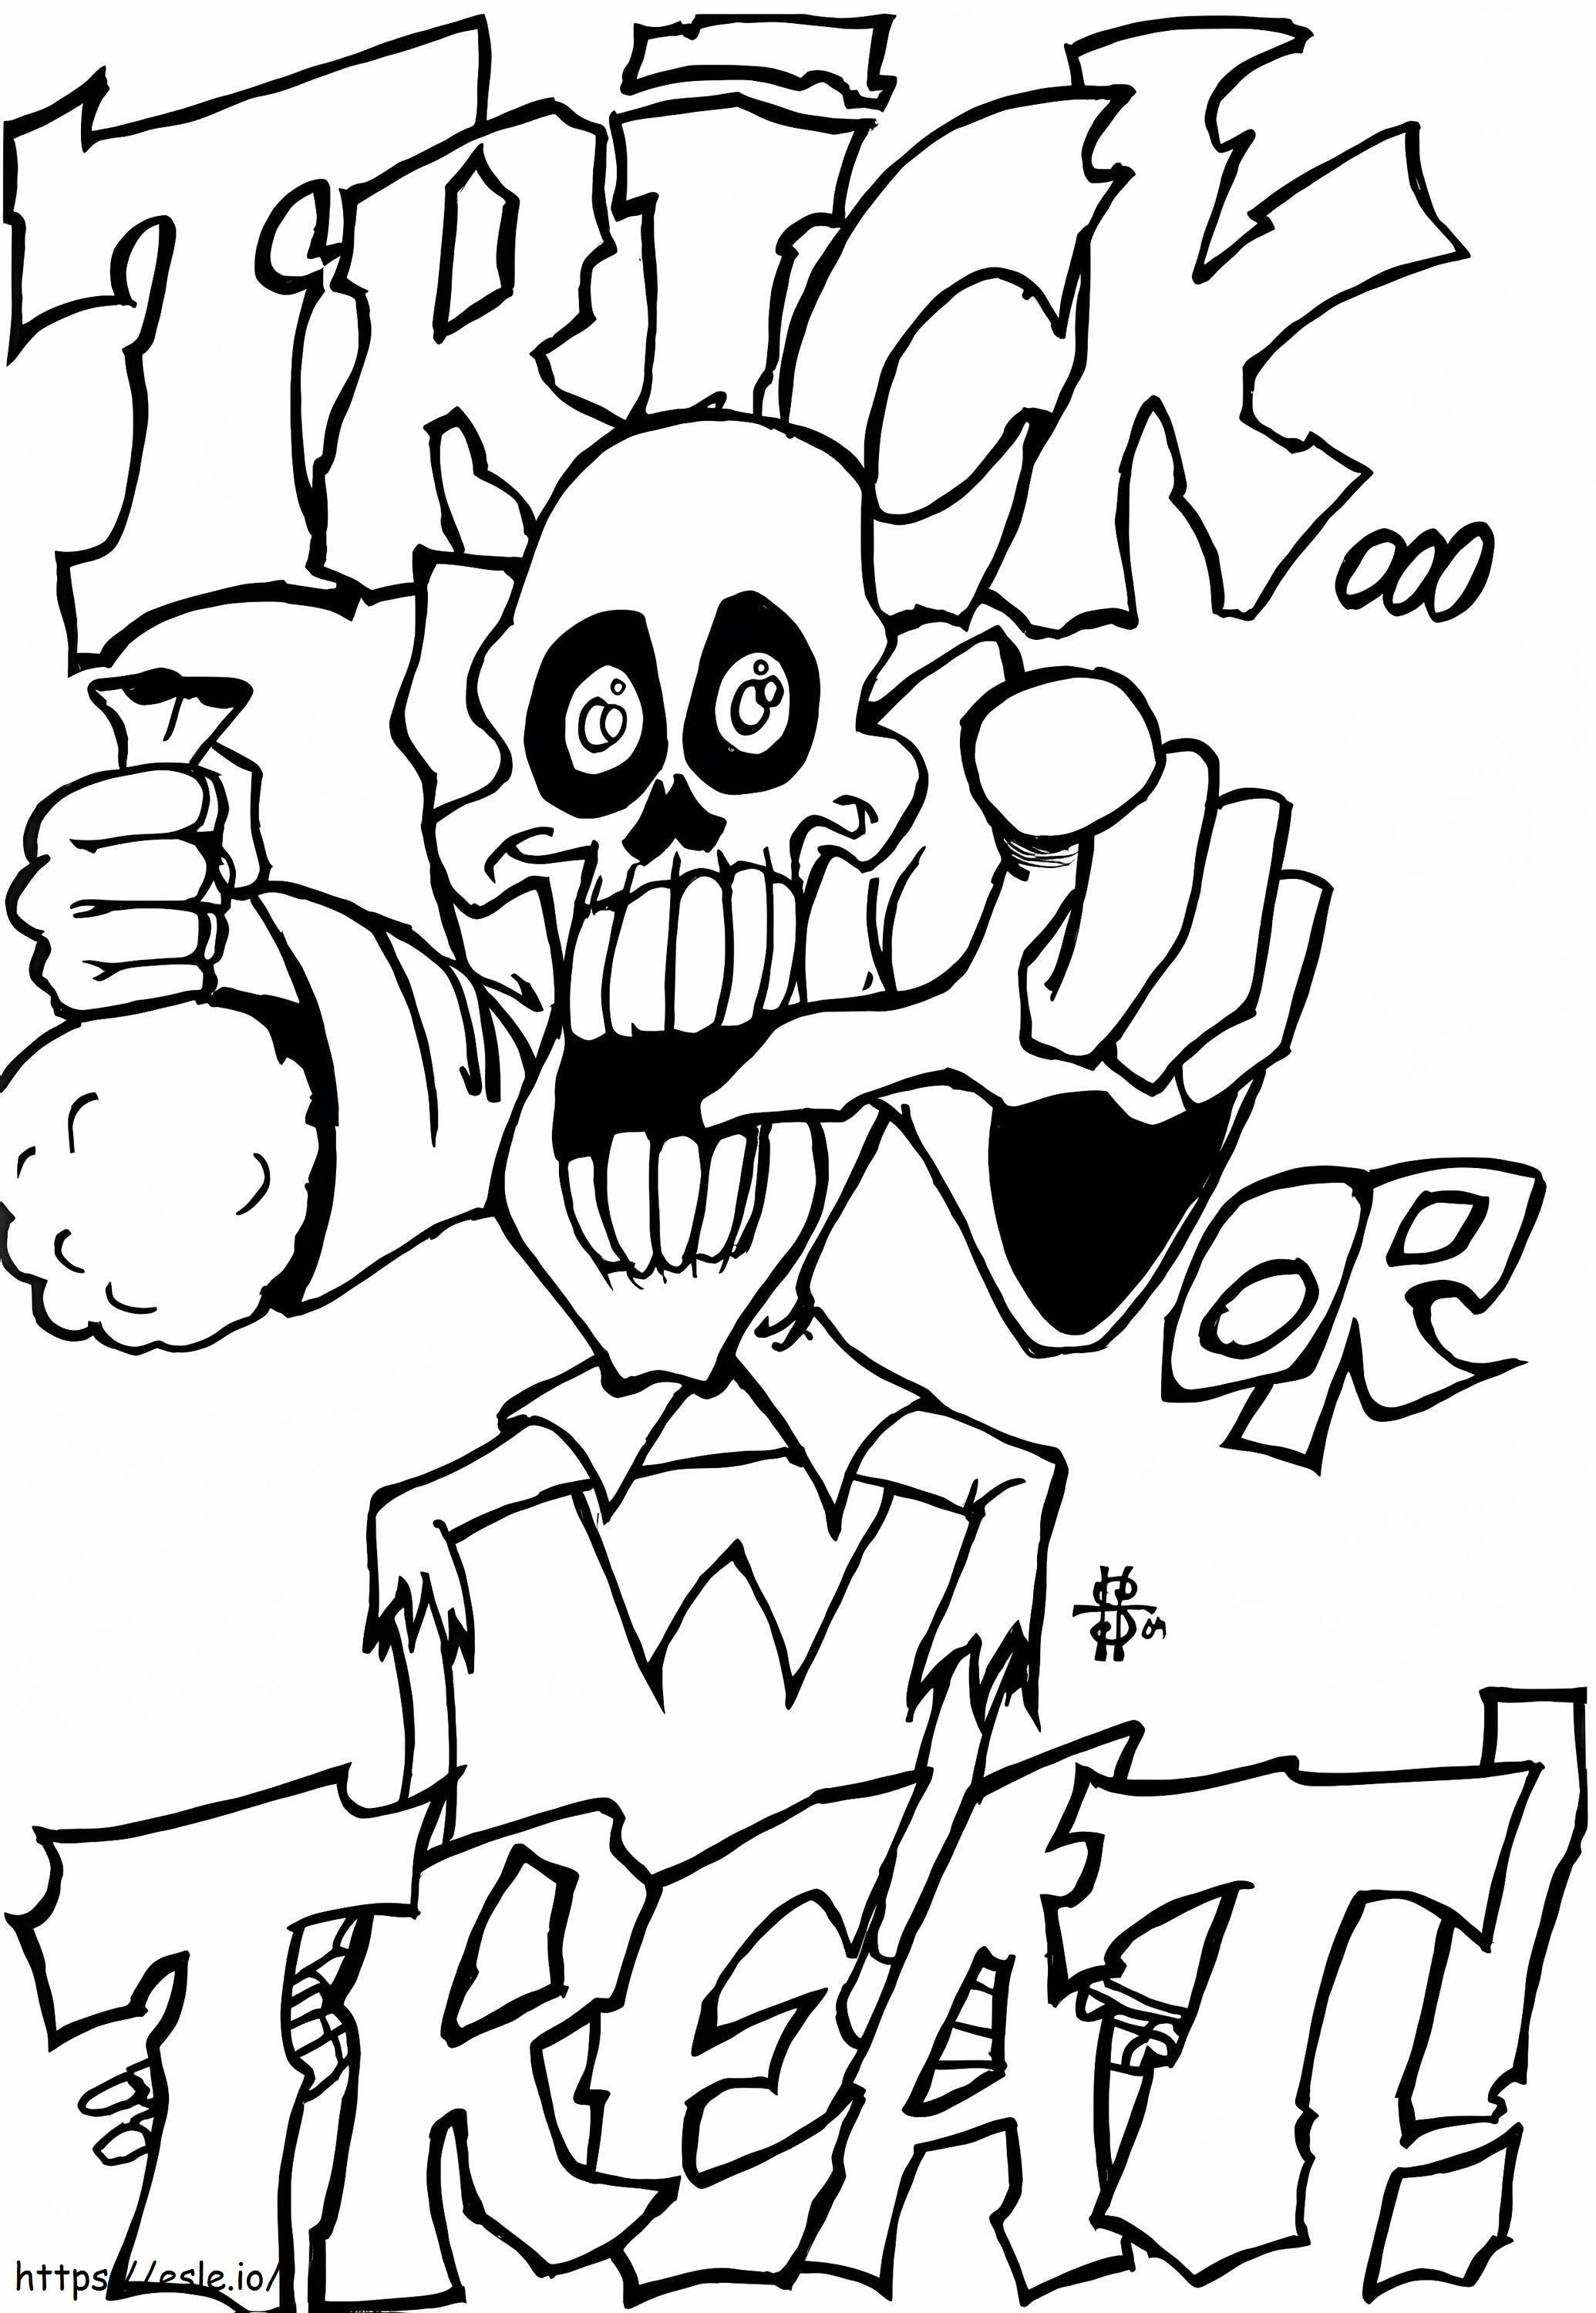 Trick Or Treat 4 coloring page